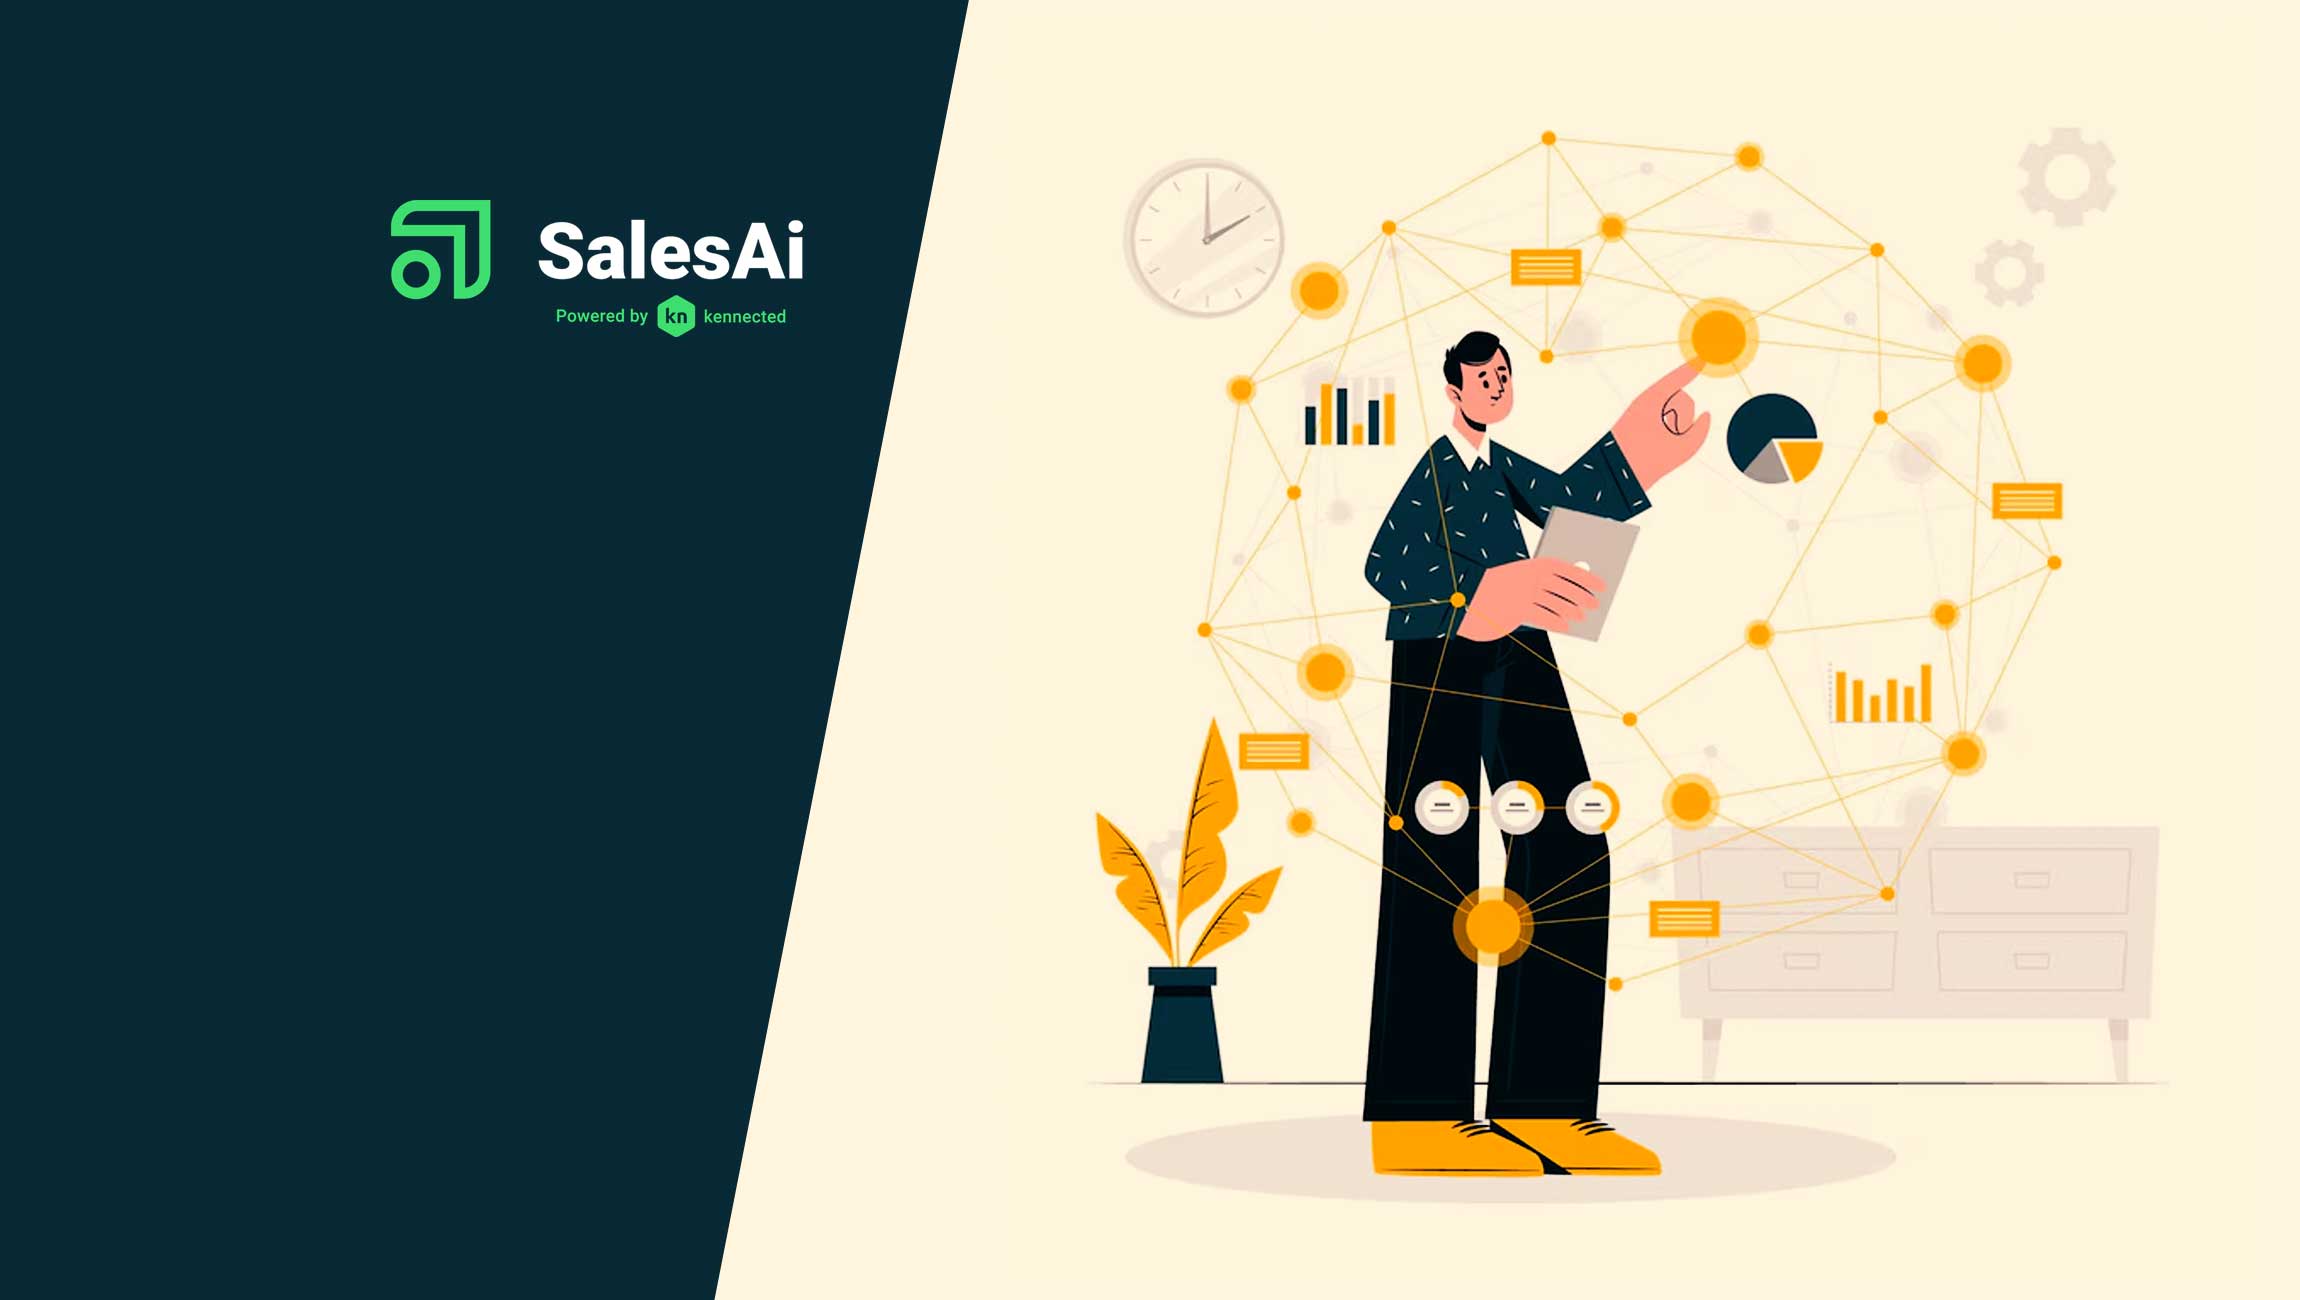 SalesAi Revolutionizes Sales Enablement with Hyper Personalized Technology, Led by CEO Devin Allen Johnson